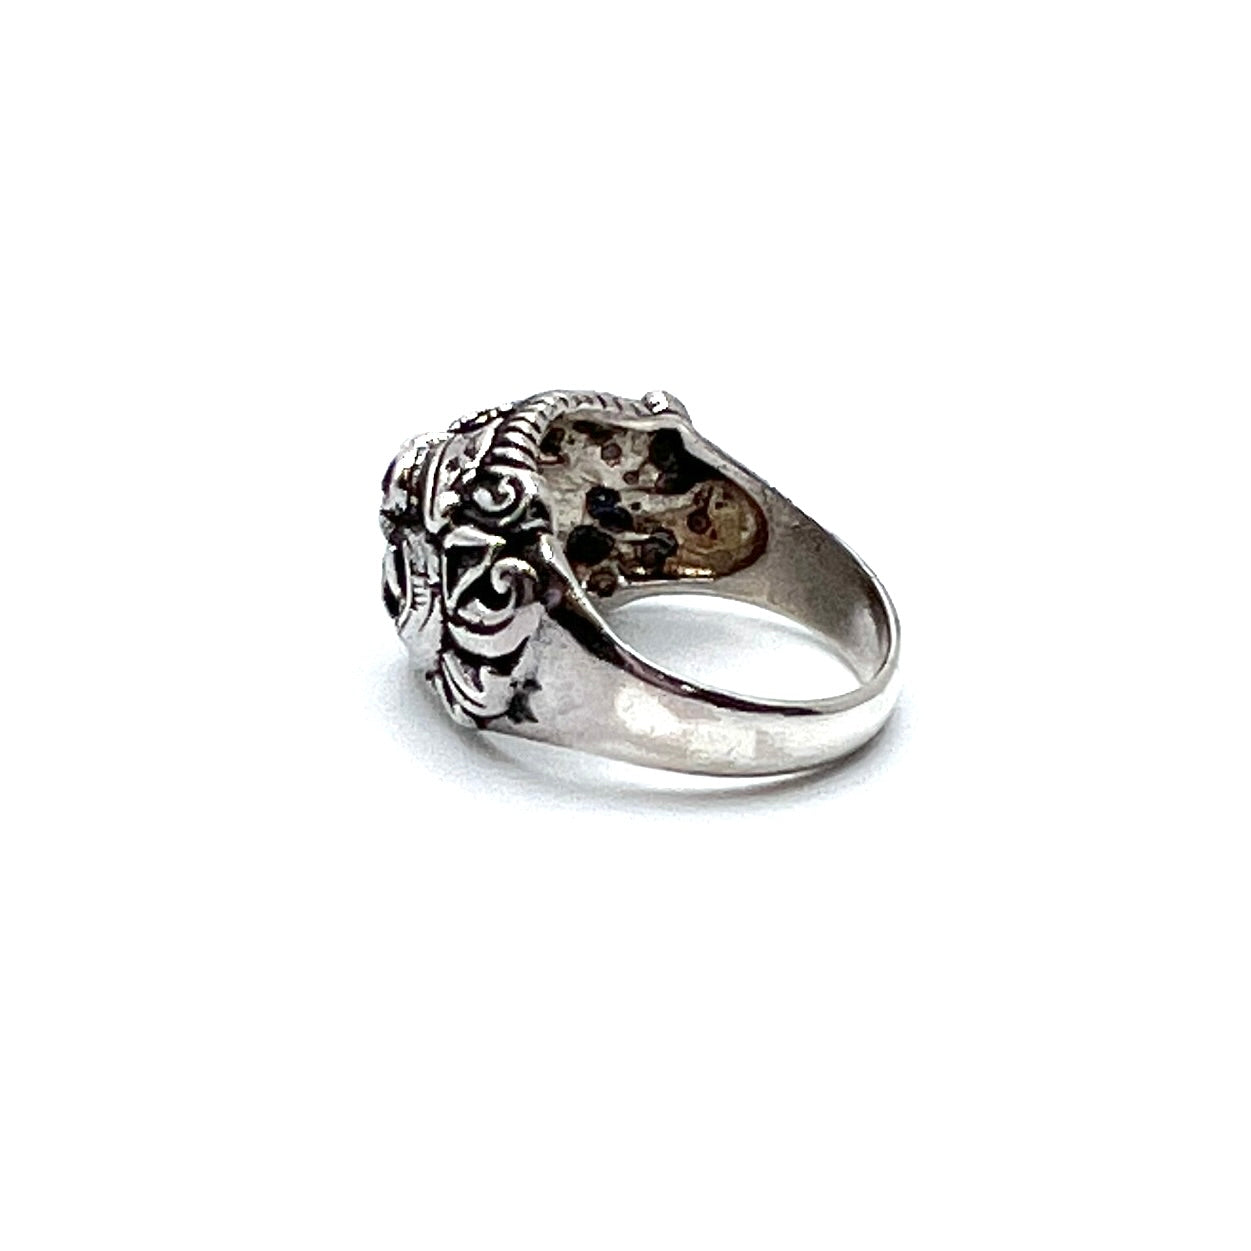 Oxidized Silver Onyx Barong Ring